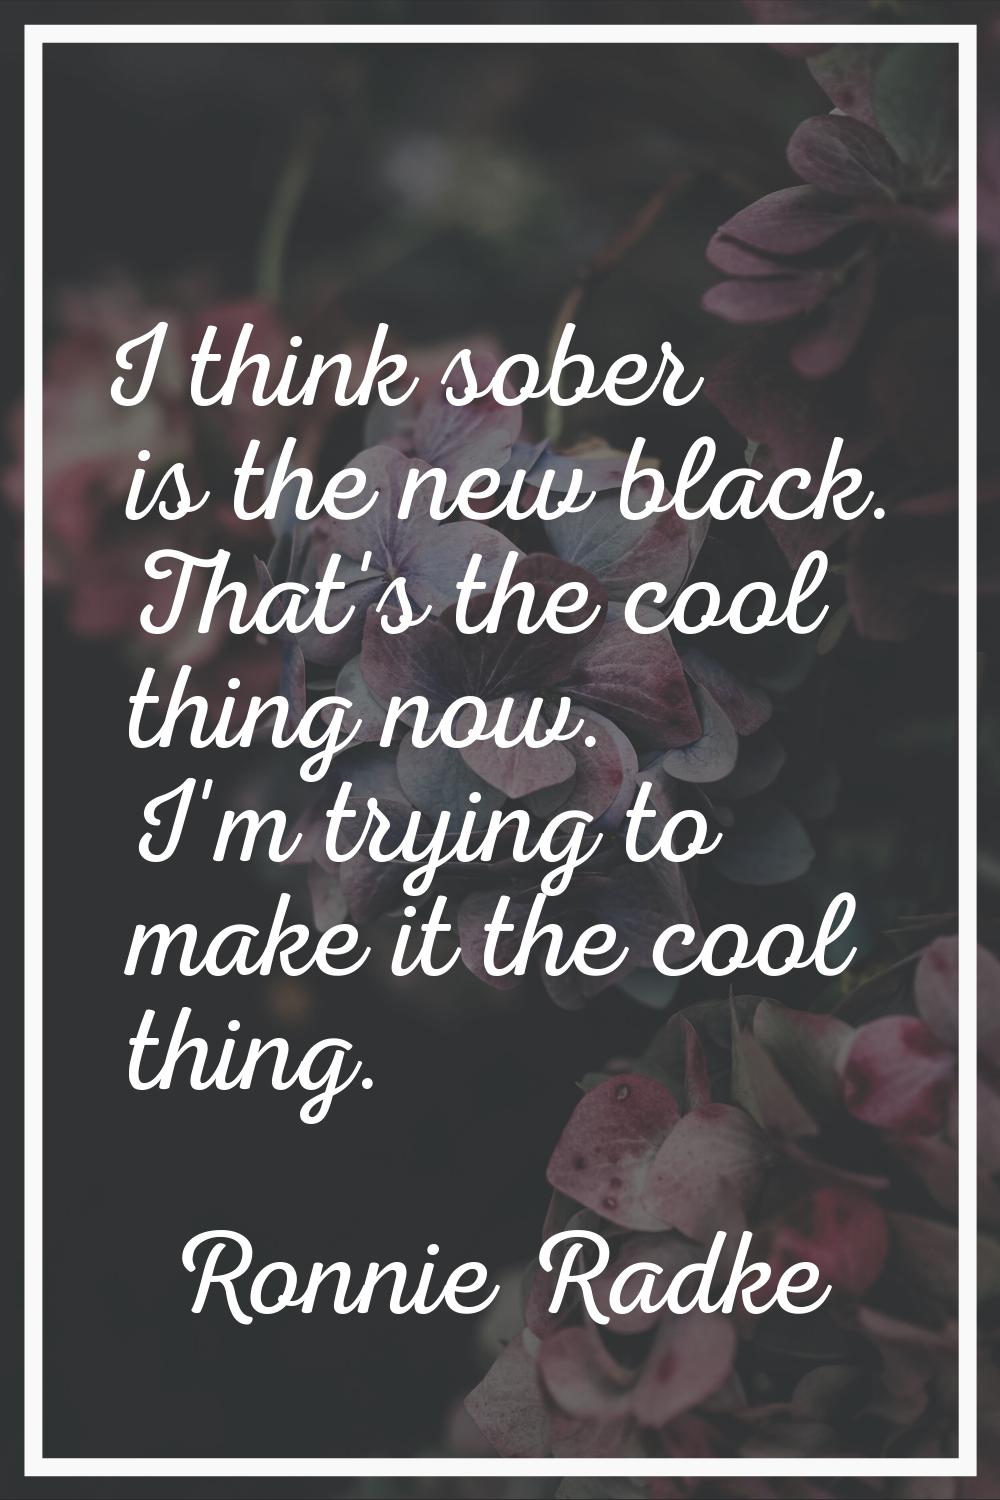 I think sober is the new black. That's the cool thing now. I'm trying to make it the cool thing.